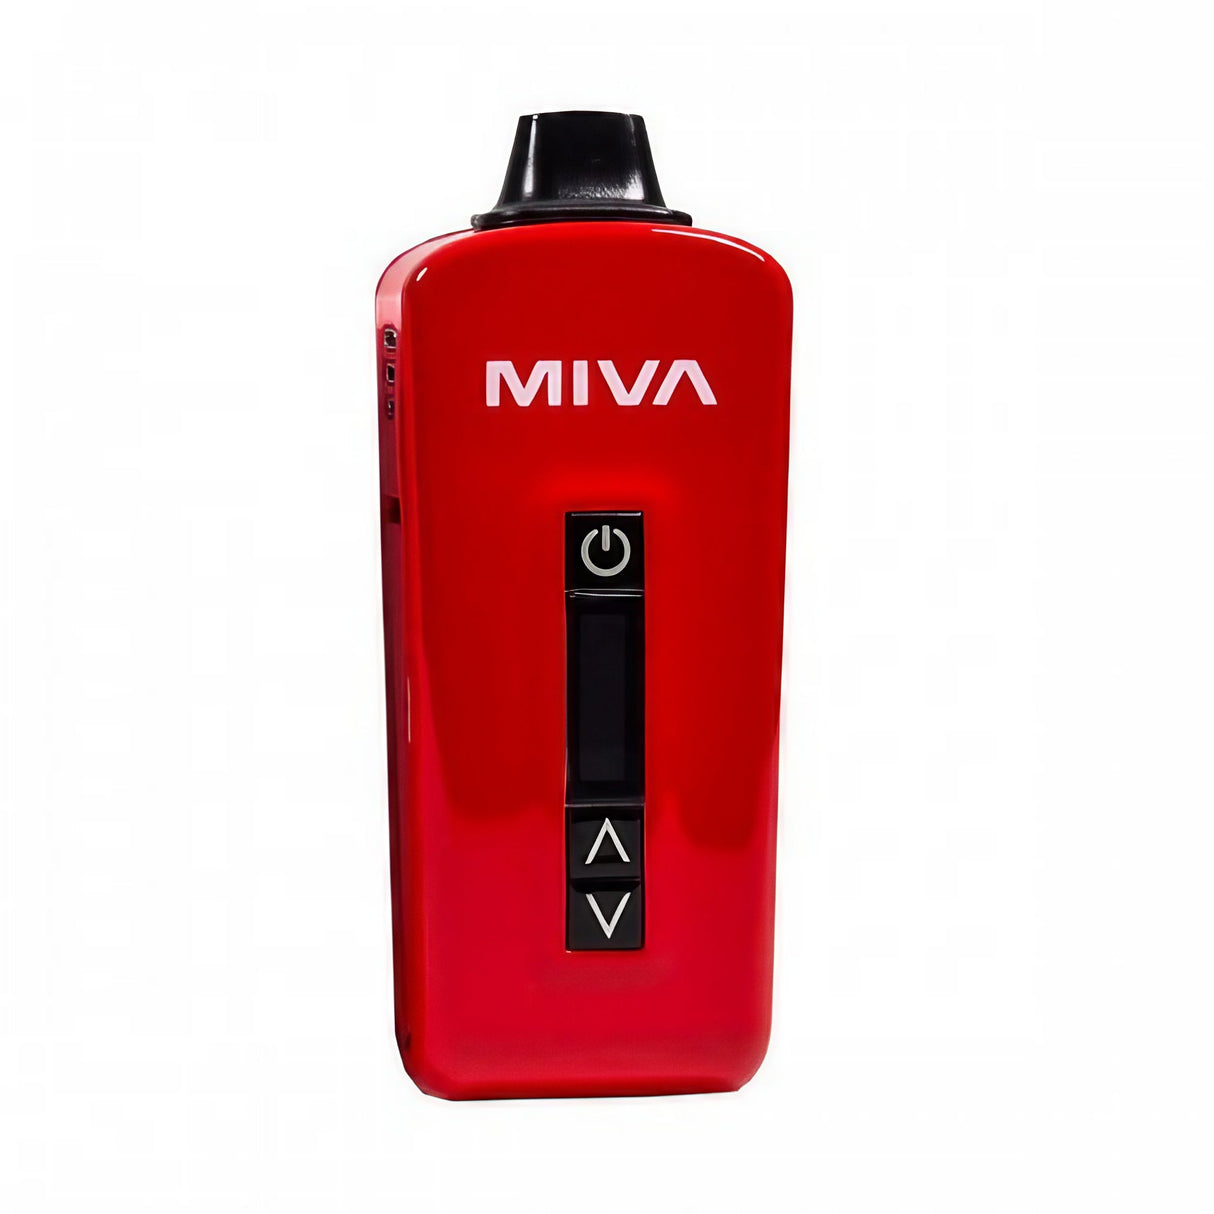 KandyPens MIVA 2 Vaporizer in Red with Power Buttons - Front View